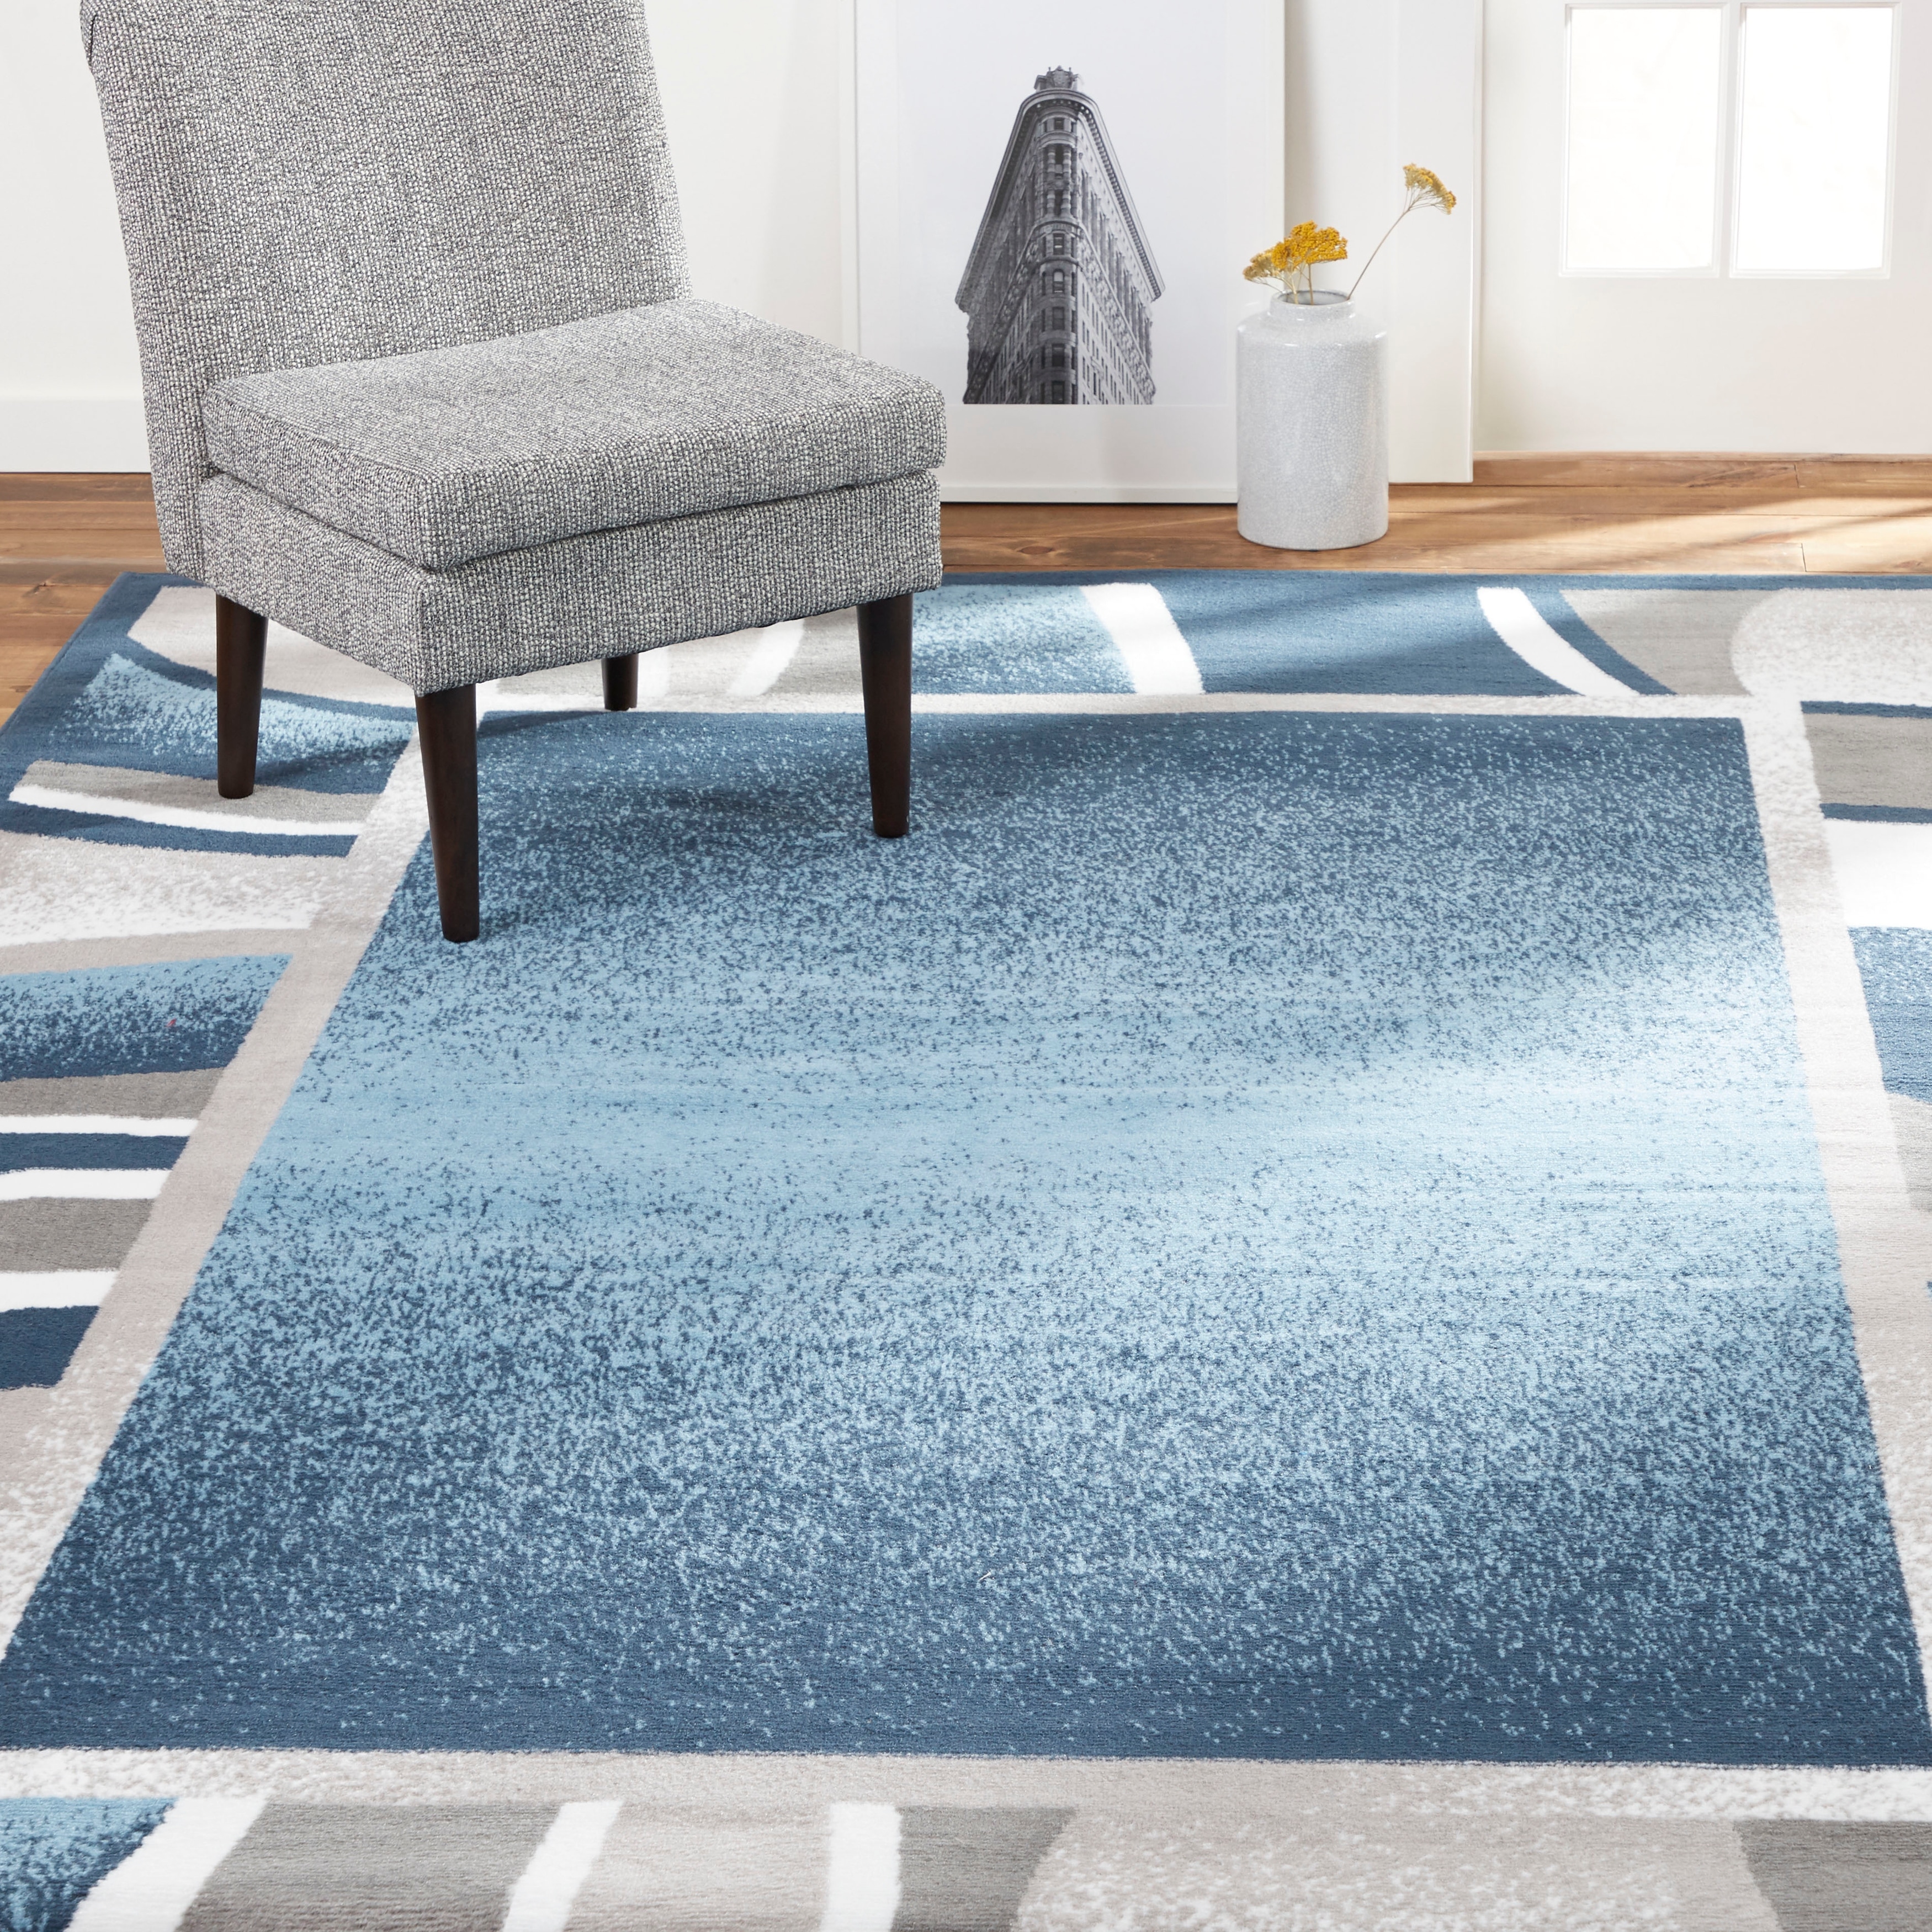 https://ak1.ostkcdn.com/images/products/is/images/direct/890a79aca77ec88f27937183c21d2ae07ab8482c/Home-Dynamix-Premium-Rizzy-Contemporary-Border-Area-Rug.jpg